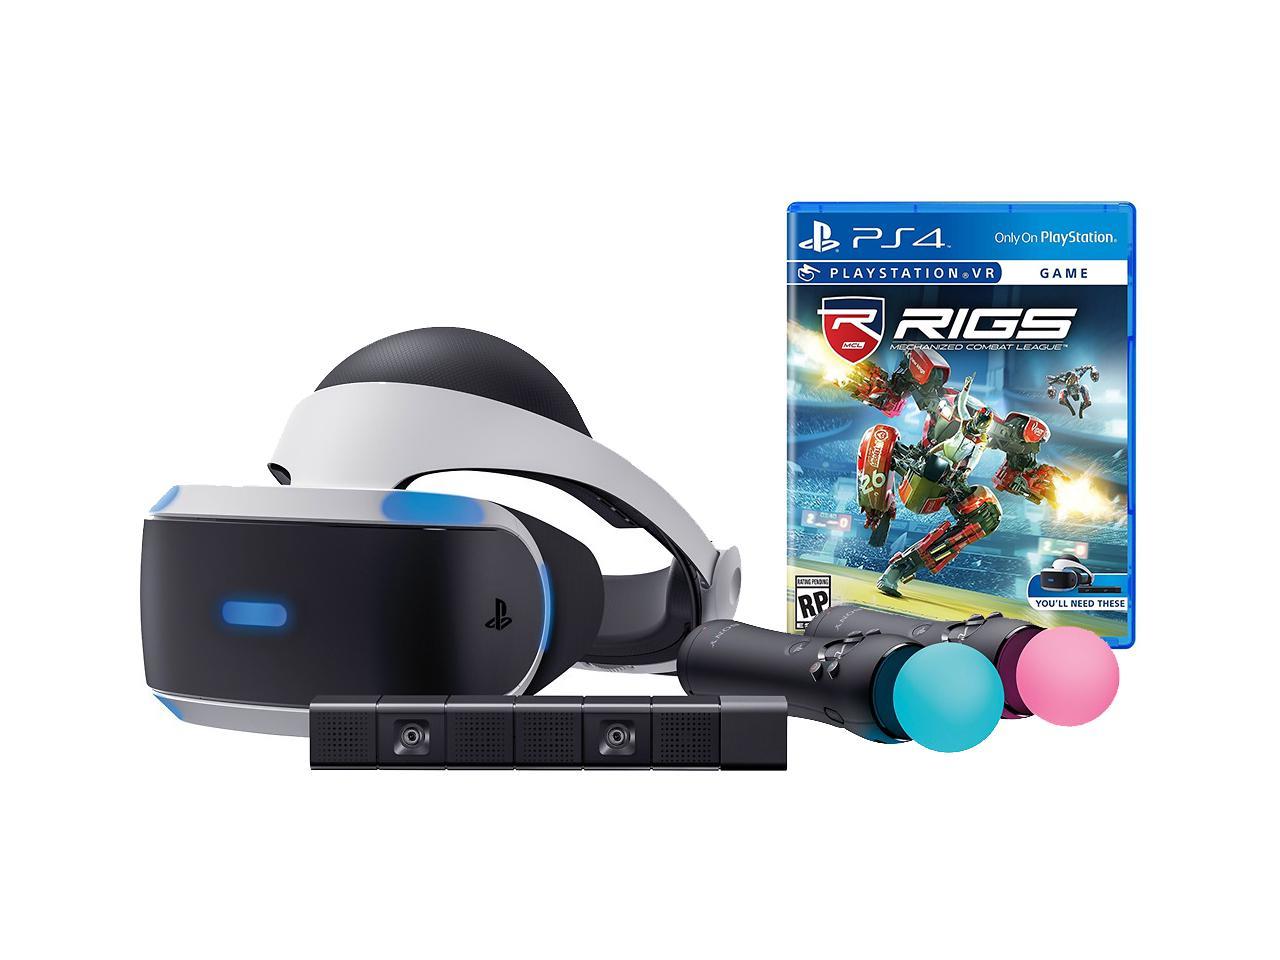 PlayStation VR RIGS Starter Bundle (4 items): VR Headset, 2 Move Motion Controllers, PlayStation Camera, RIGS Mechanized Combat League Game Disc